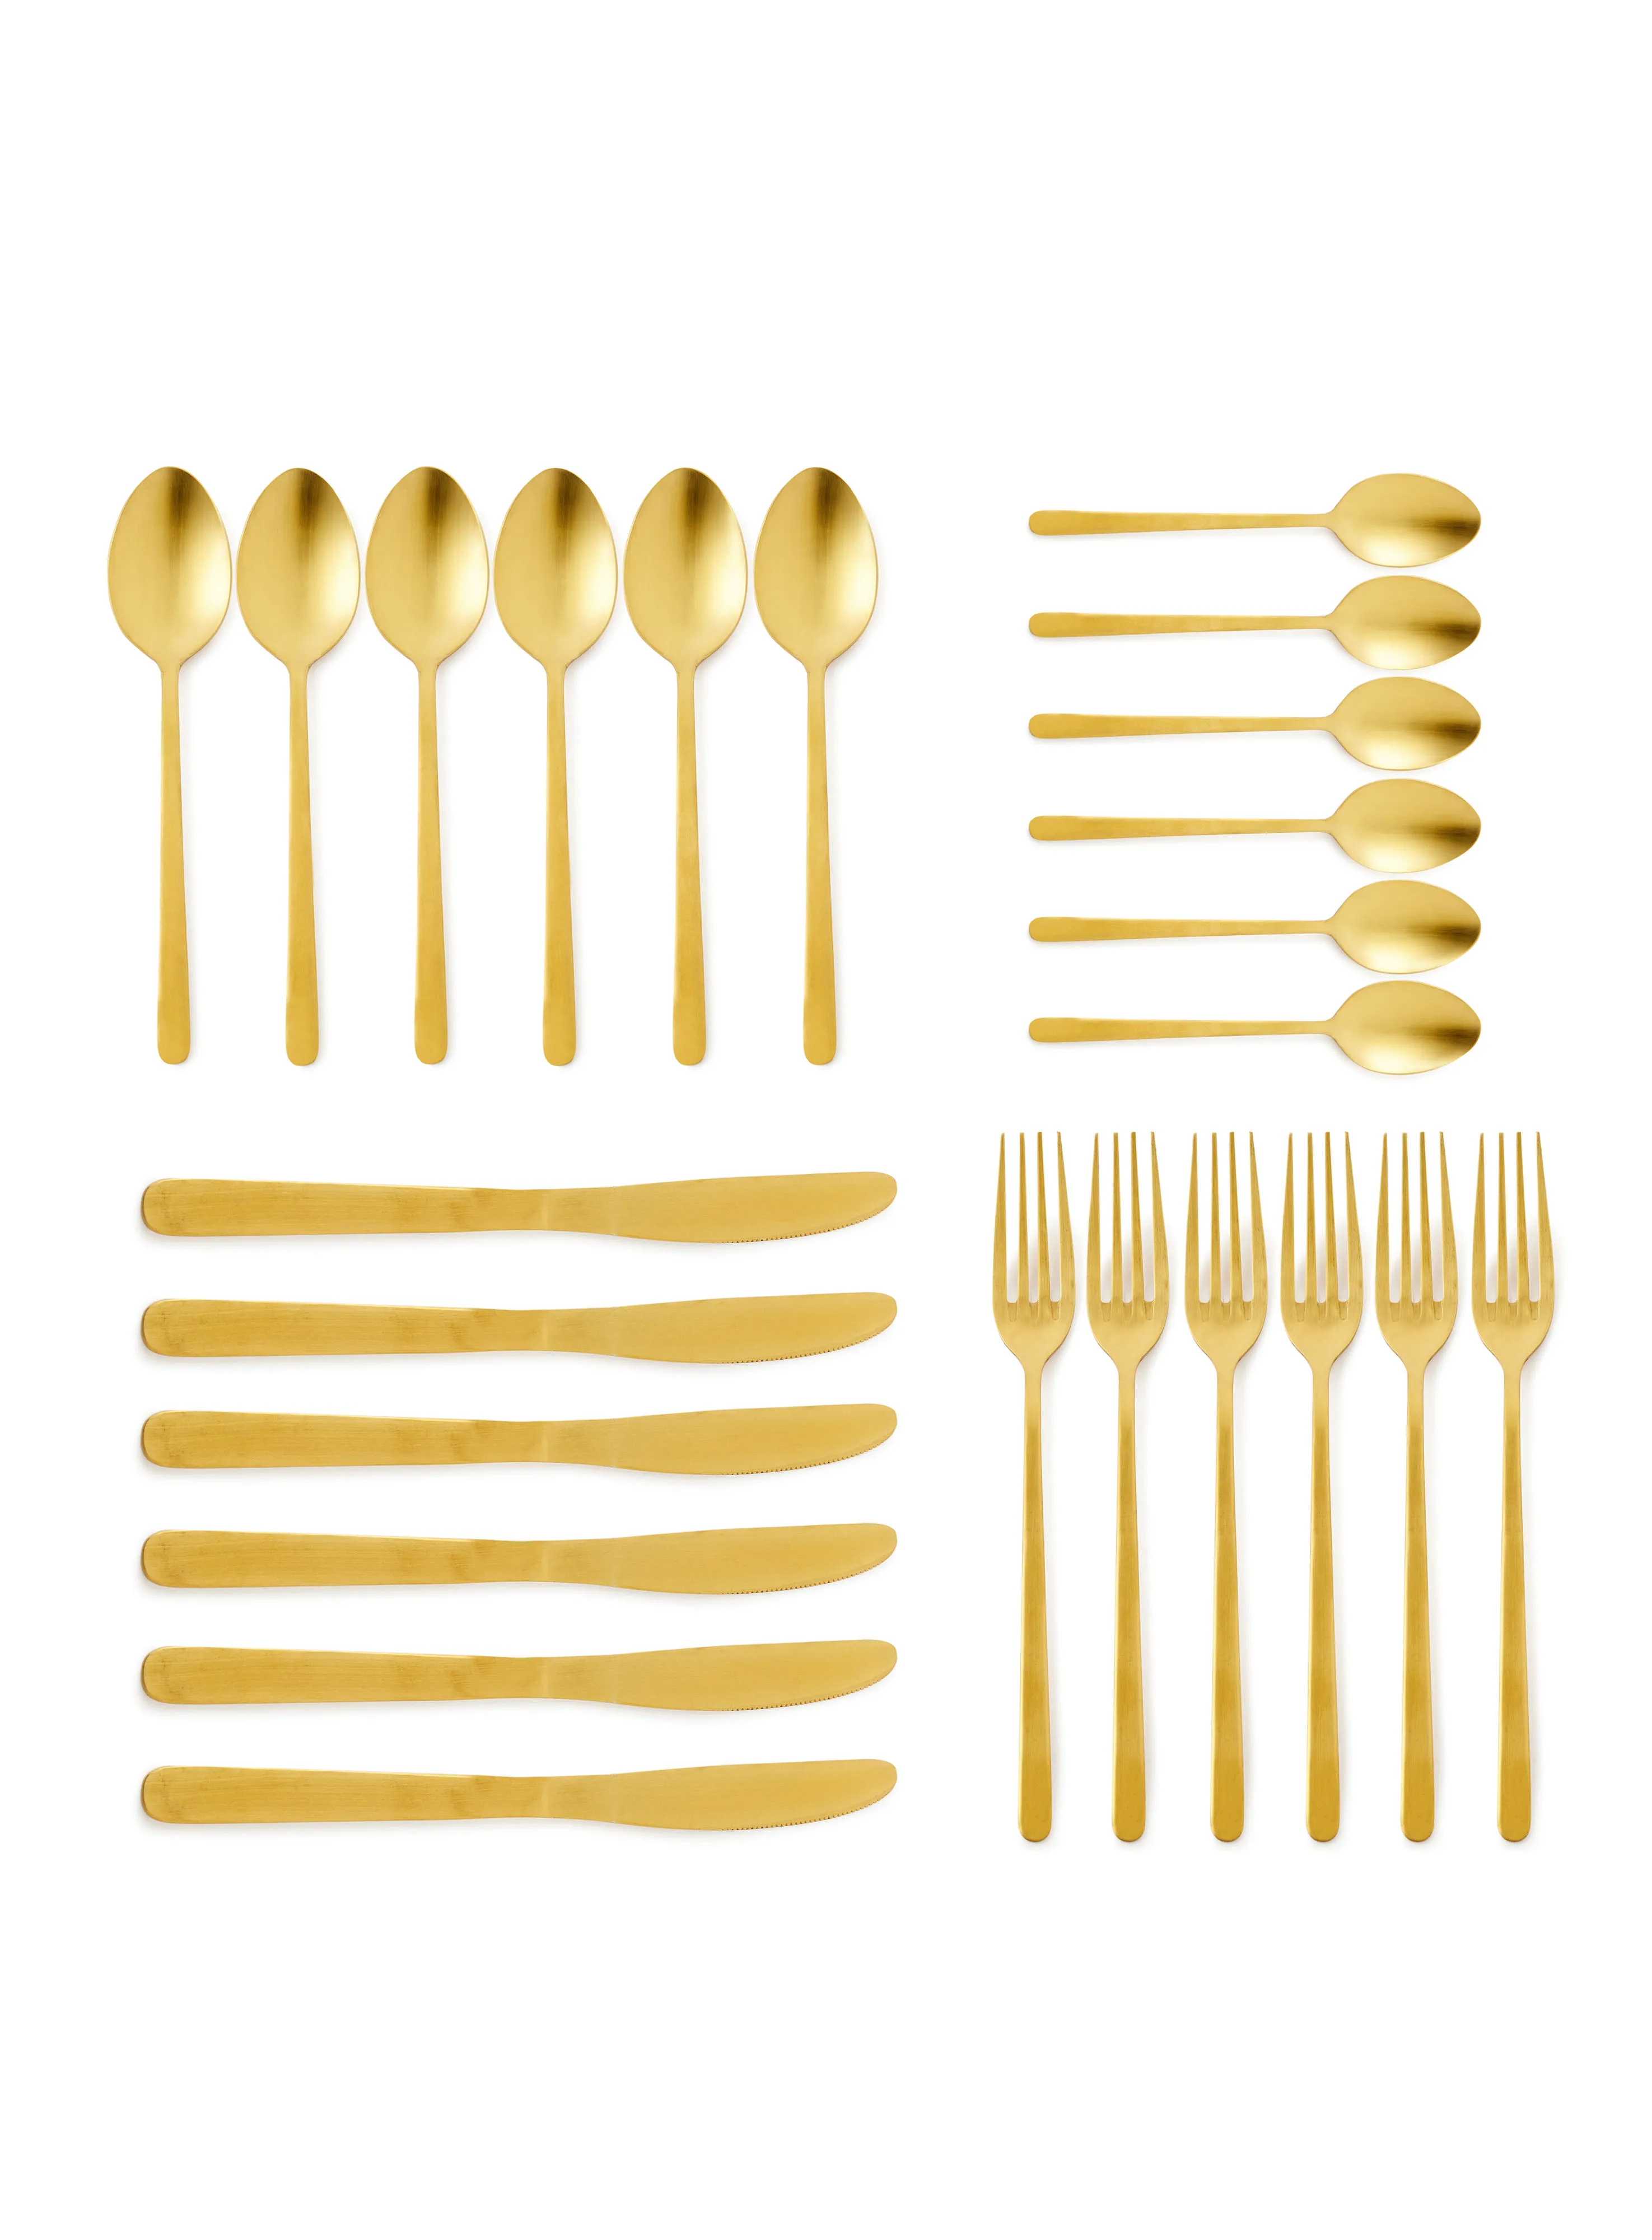 noon east 24 Piece Cutlery Set - Made Of Stainless Steel - Silverware Flatware - Spoons And Forks Set, Spoon Set - Table Spoons, Tea Spoons, Forks, Knives - Serves 6 - Design Gold Sail